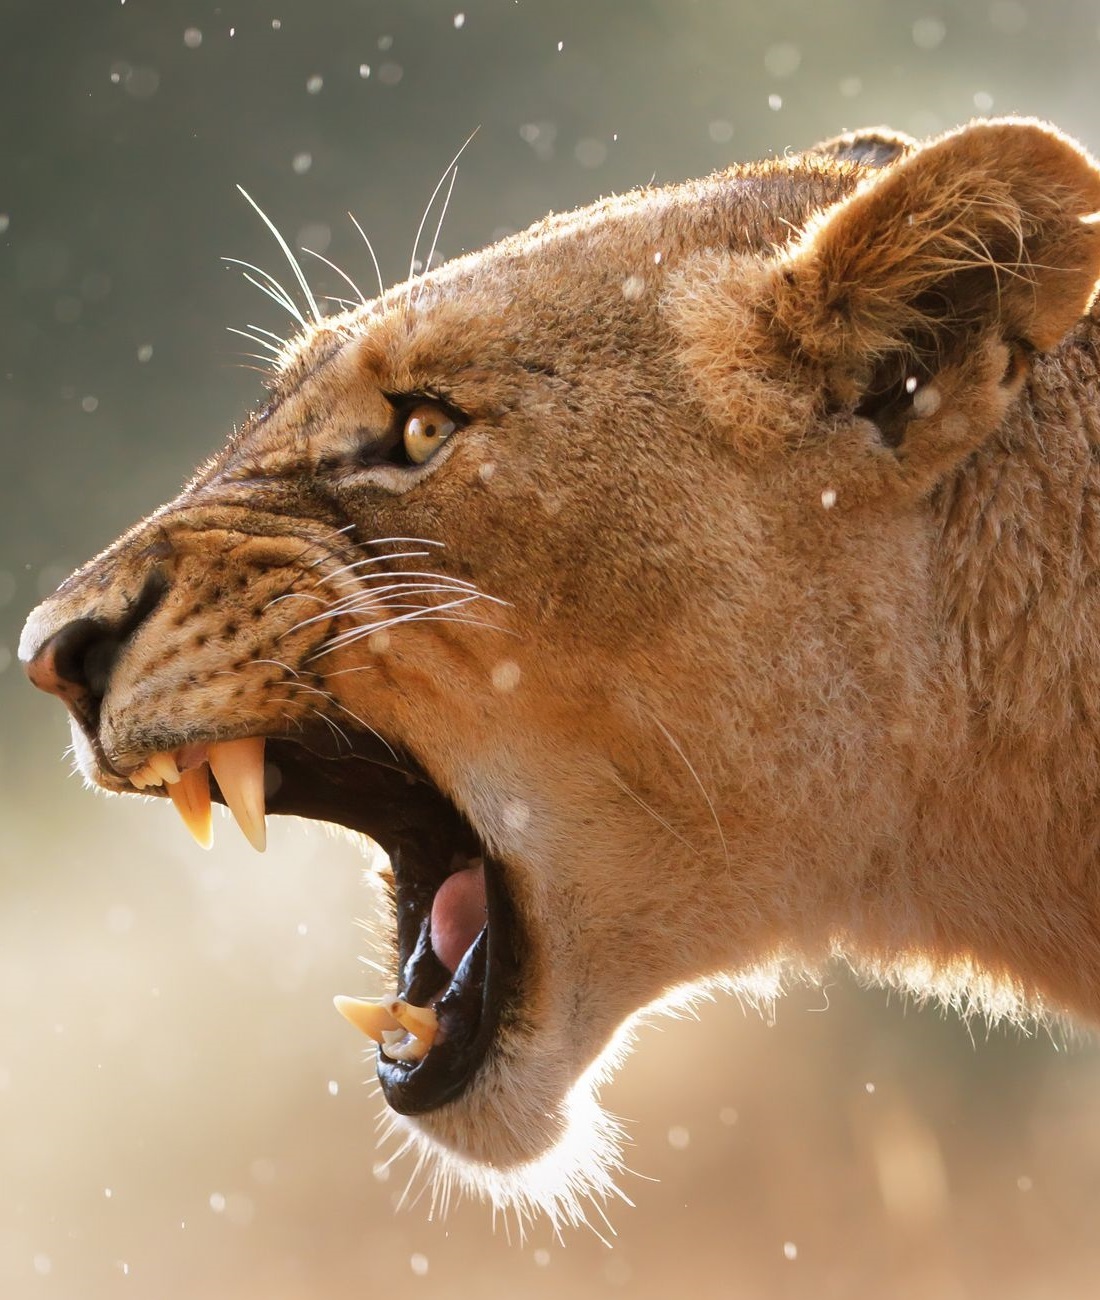 A lioness roaring